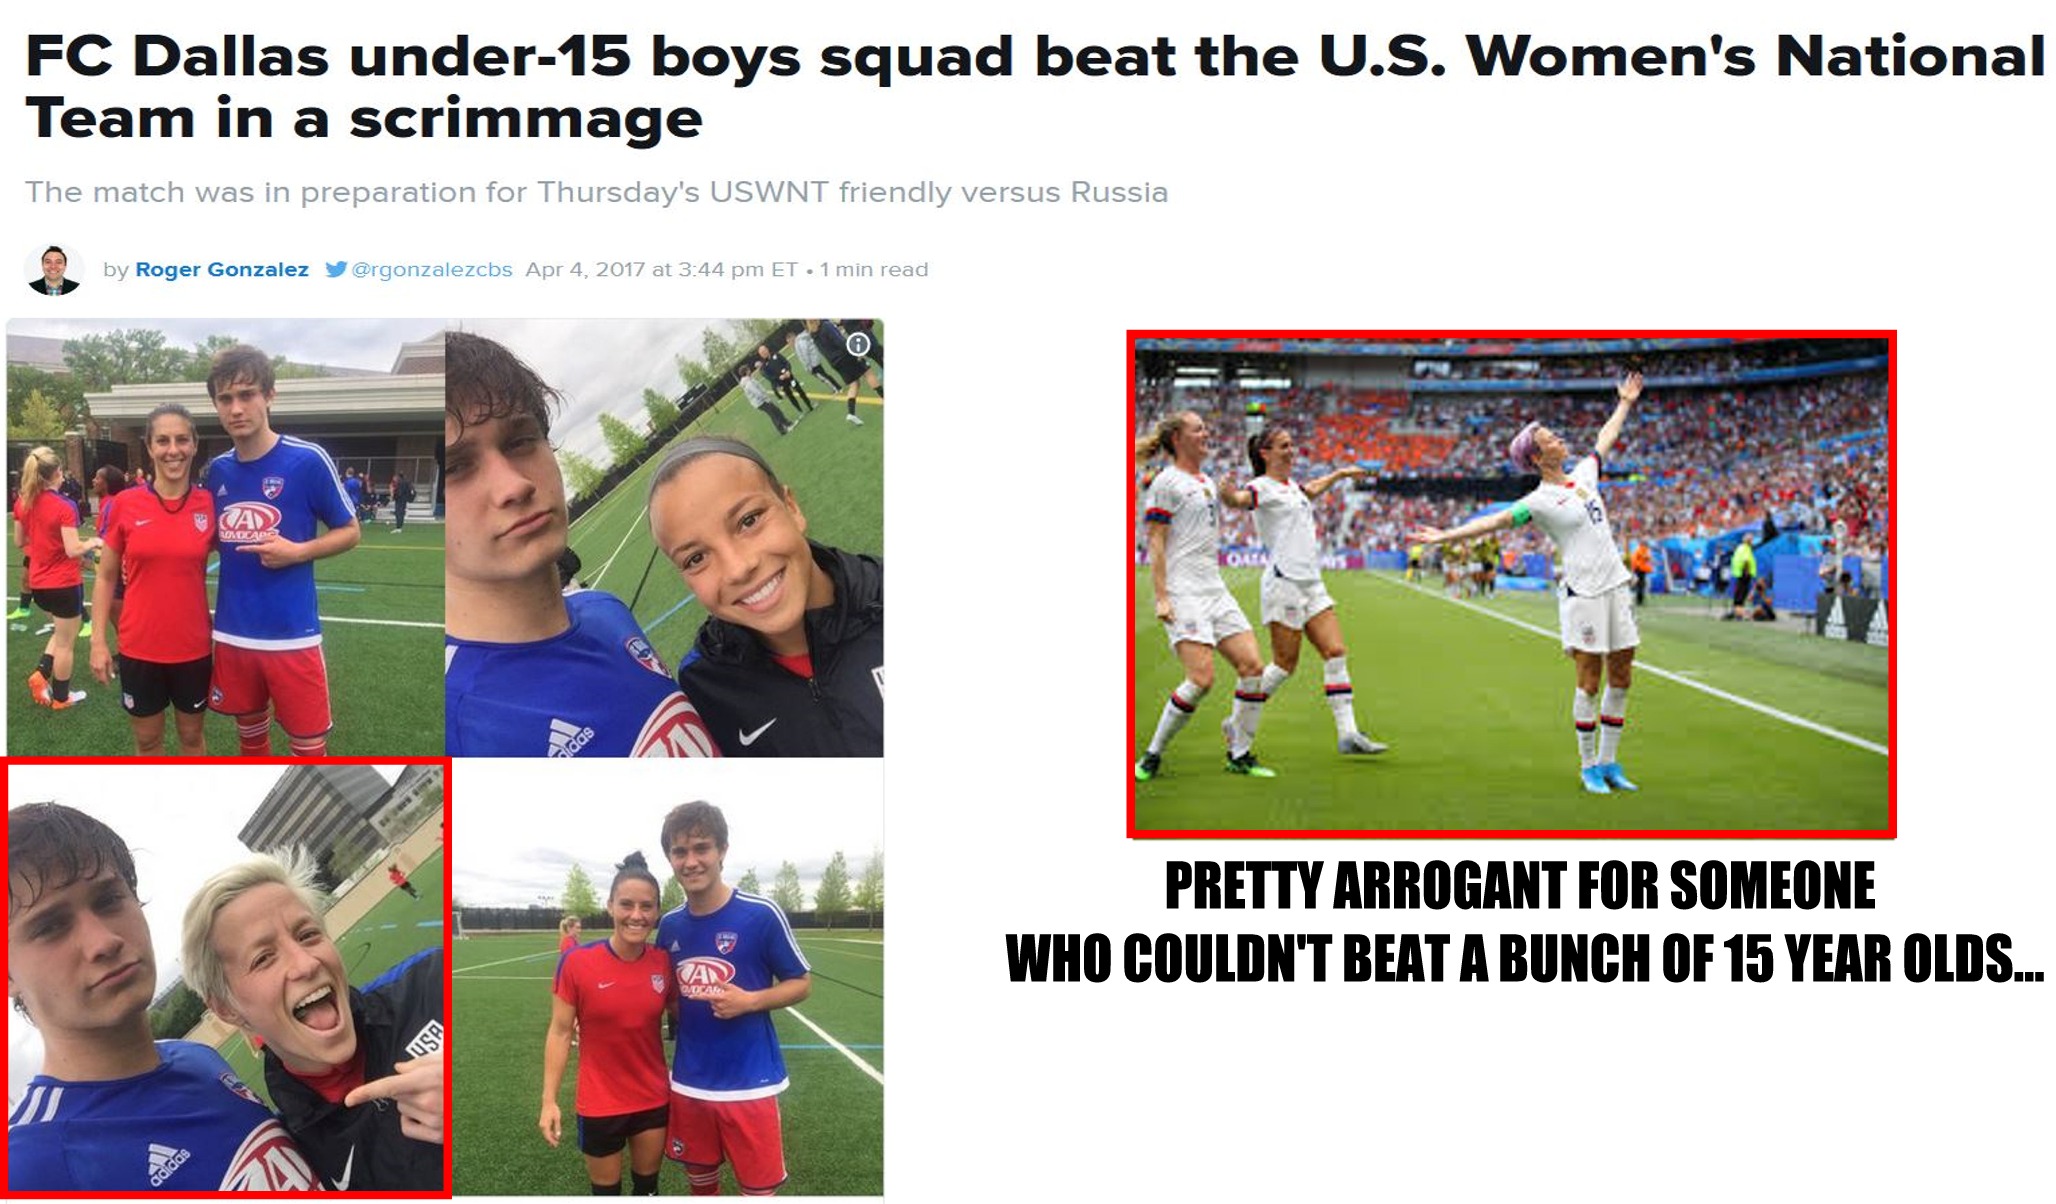 player - Fc Dallas under15 boys squad beat the U.S. Women's National Team in a scrimmage The match was in preparation for Thursday's Uswnt friendly versus Russia by Roger Gonzalez gorusechs A n d Pretty Arrogant For Someone Who Couldn'T Beat A Bunch Of 15